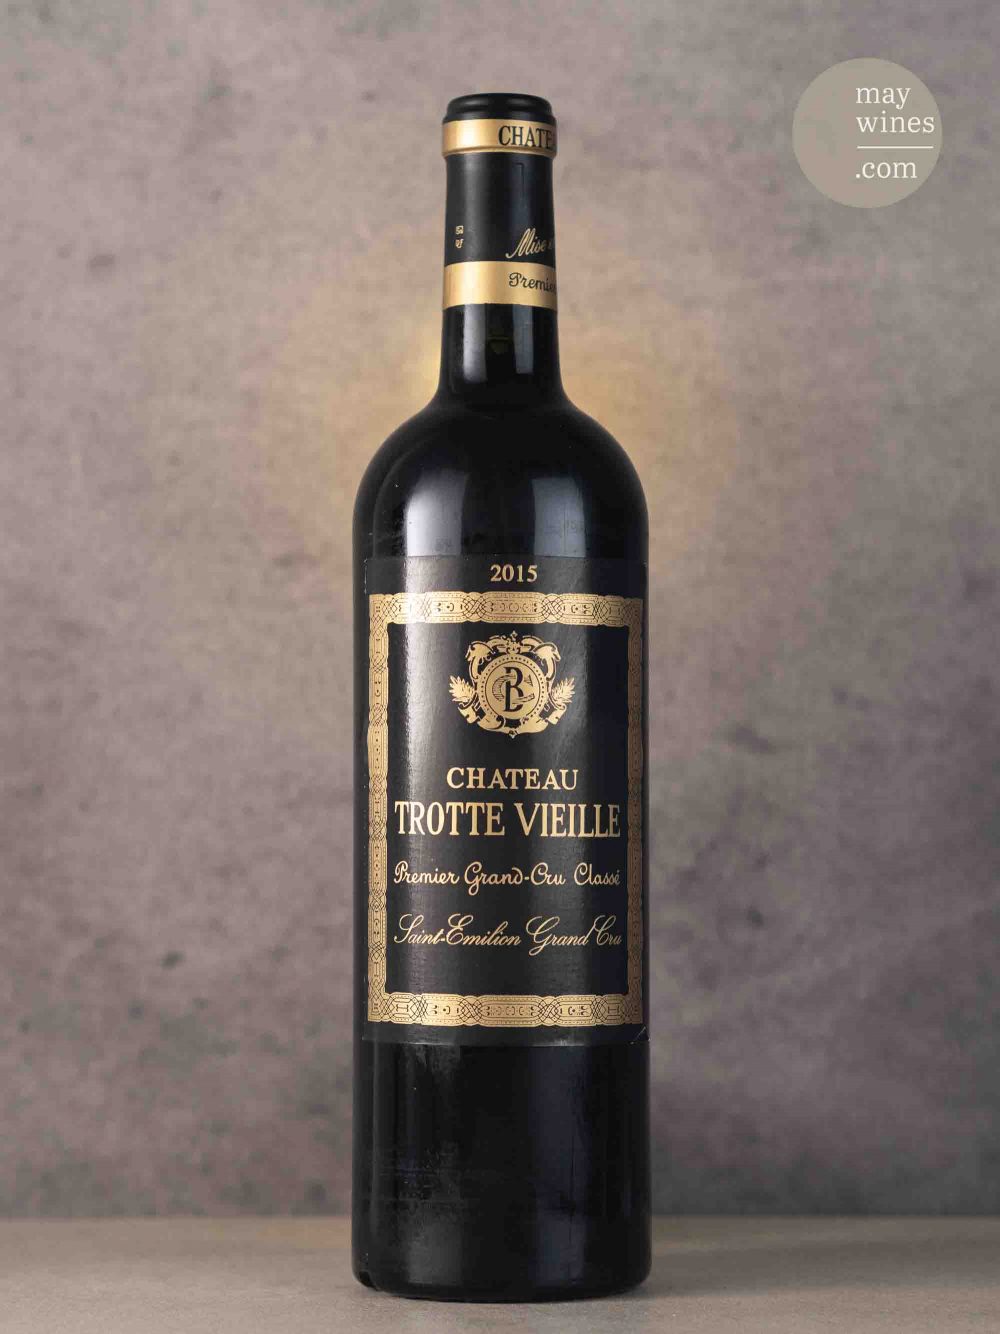 May Wines – Rotwein – 2015 Château Trotte Vieille